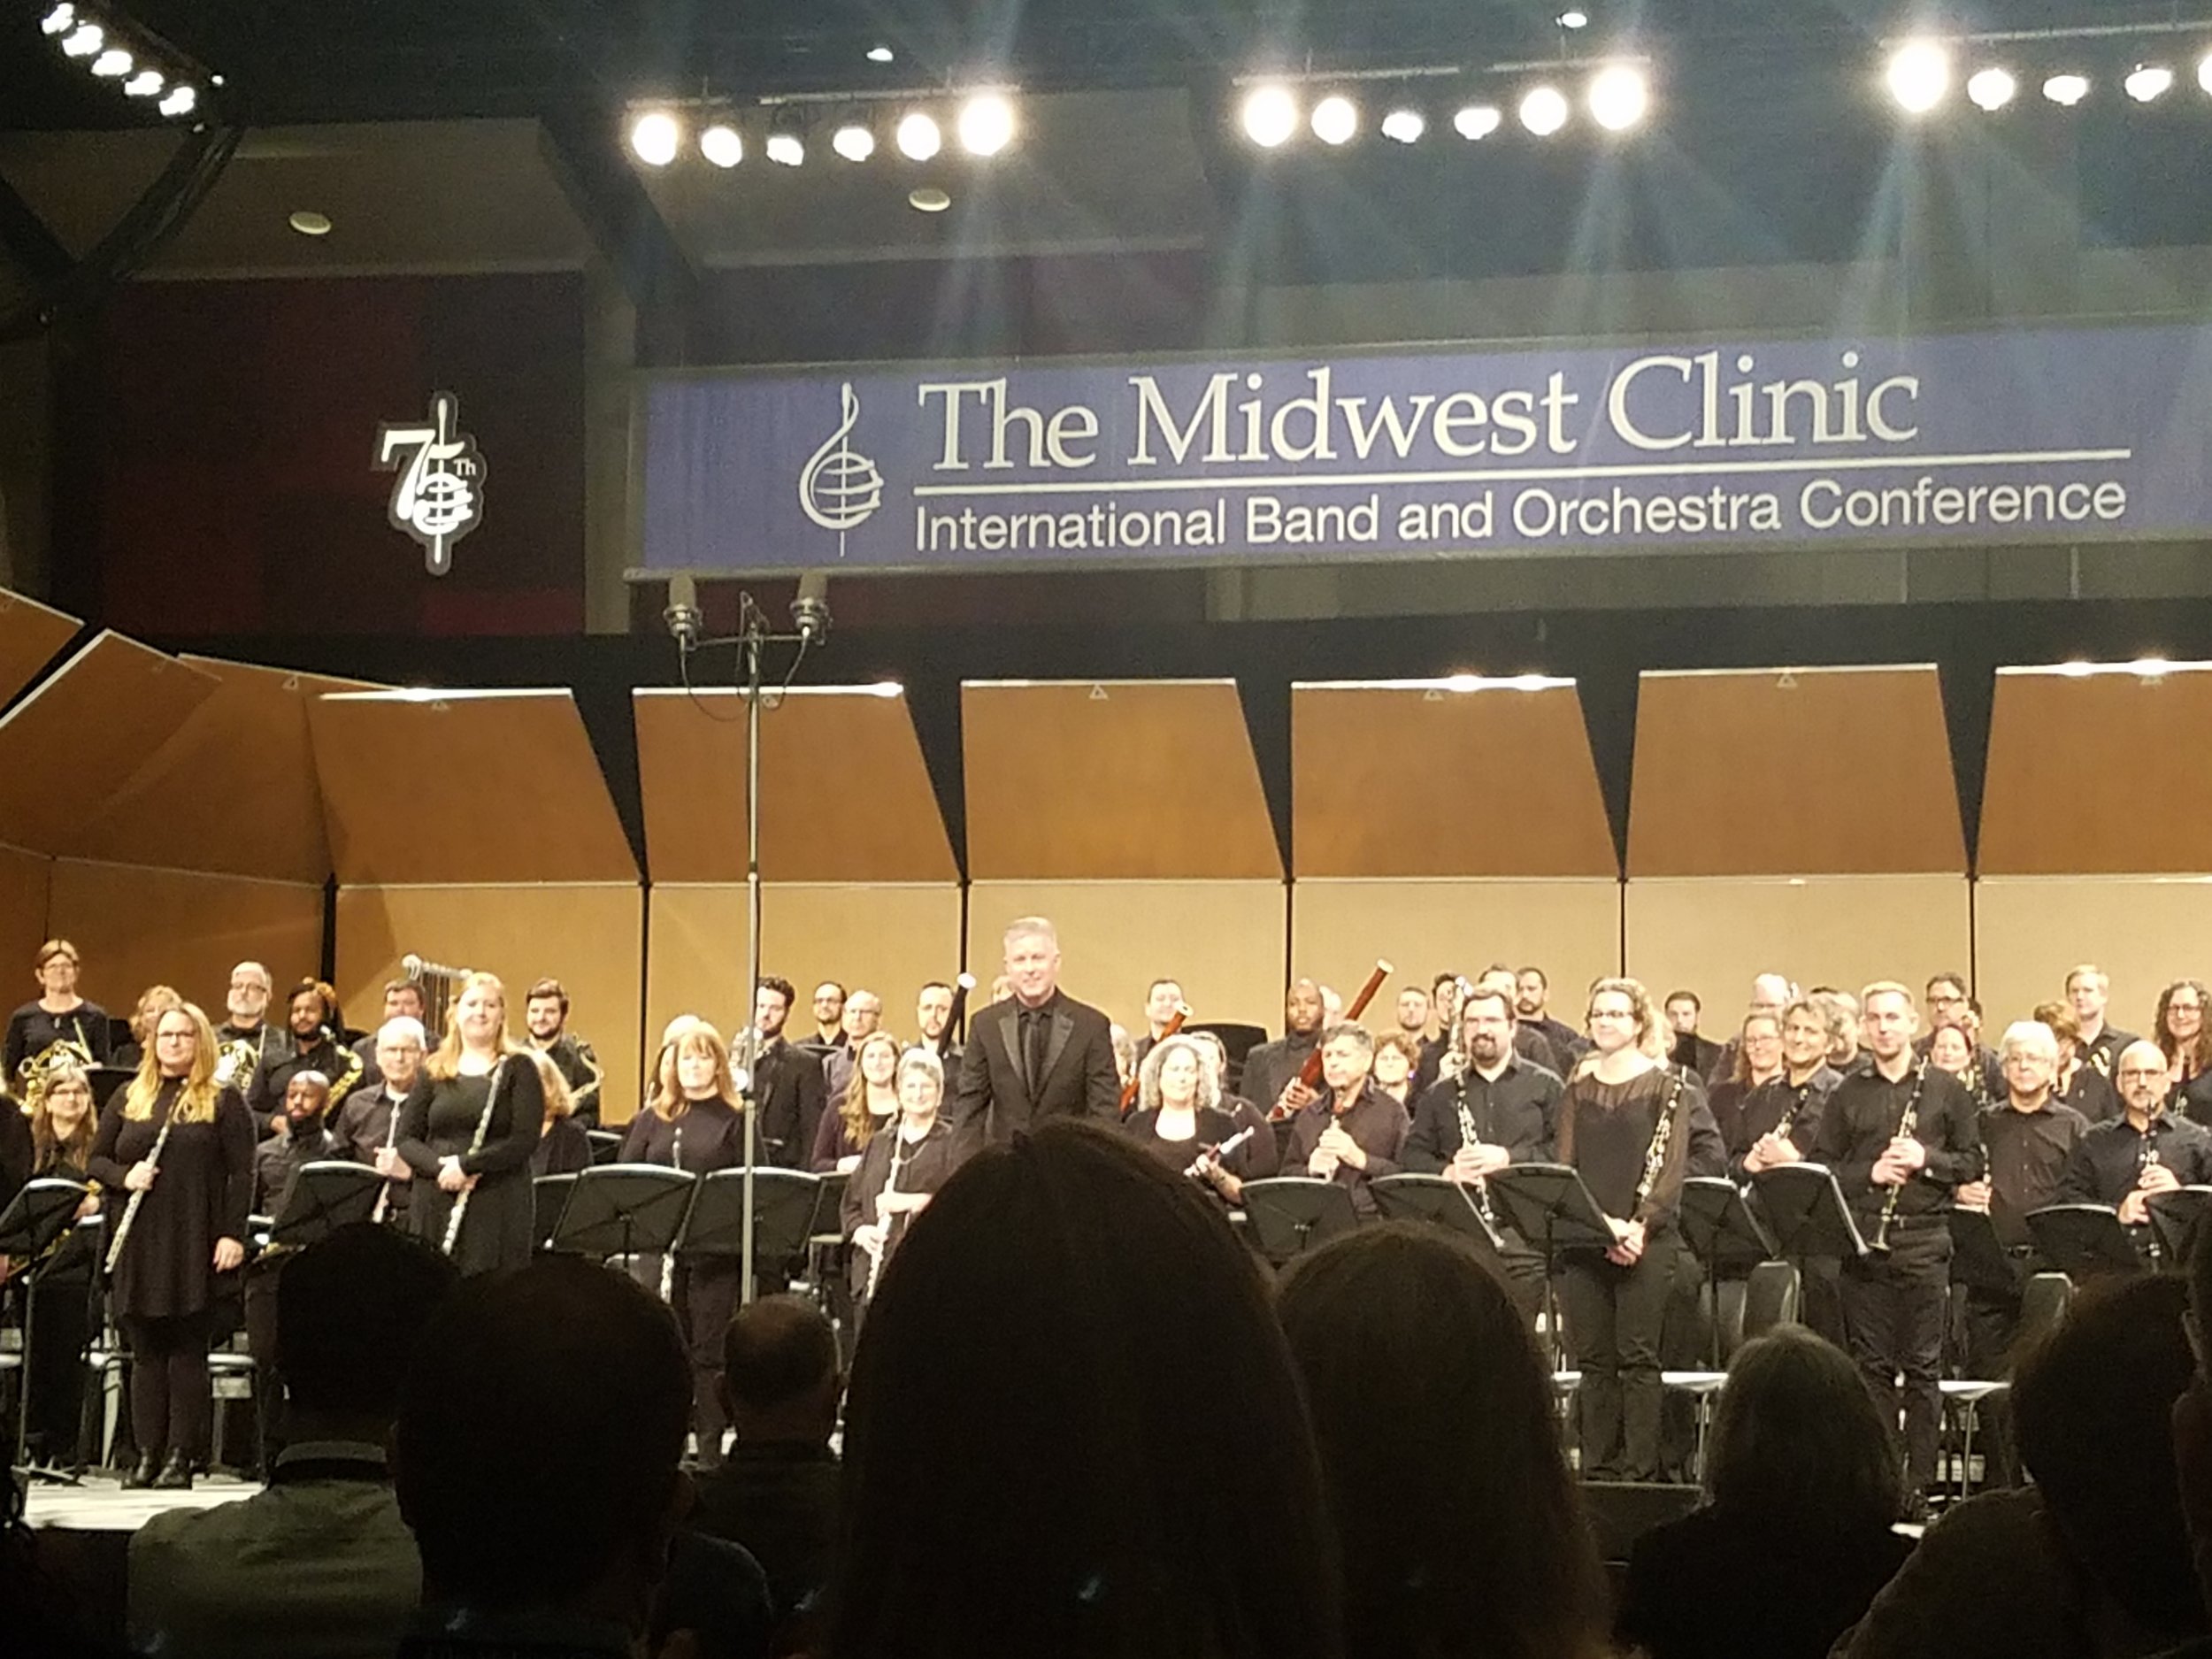  Atlanta Wind Symphony Concert at the Midwest Clinic 